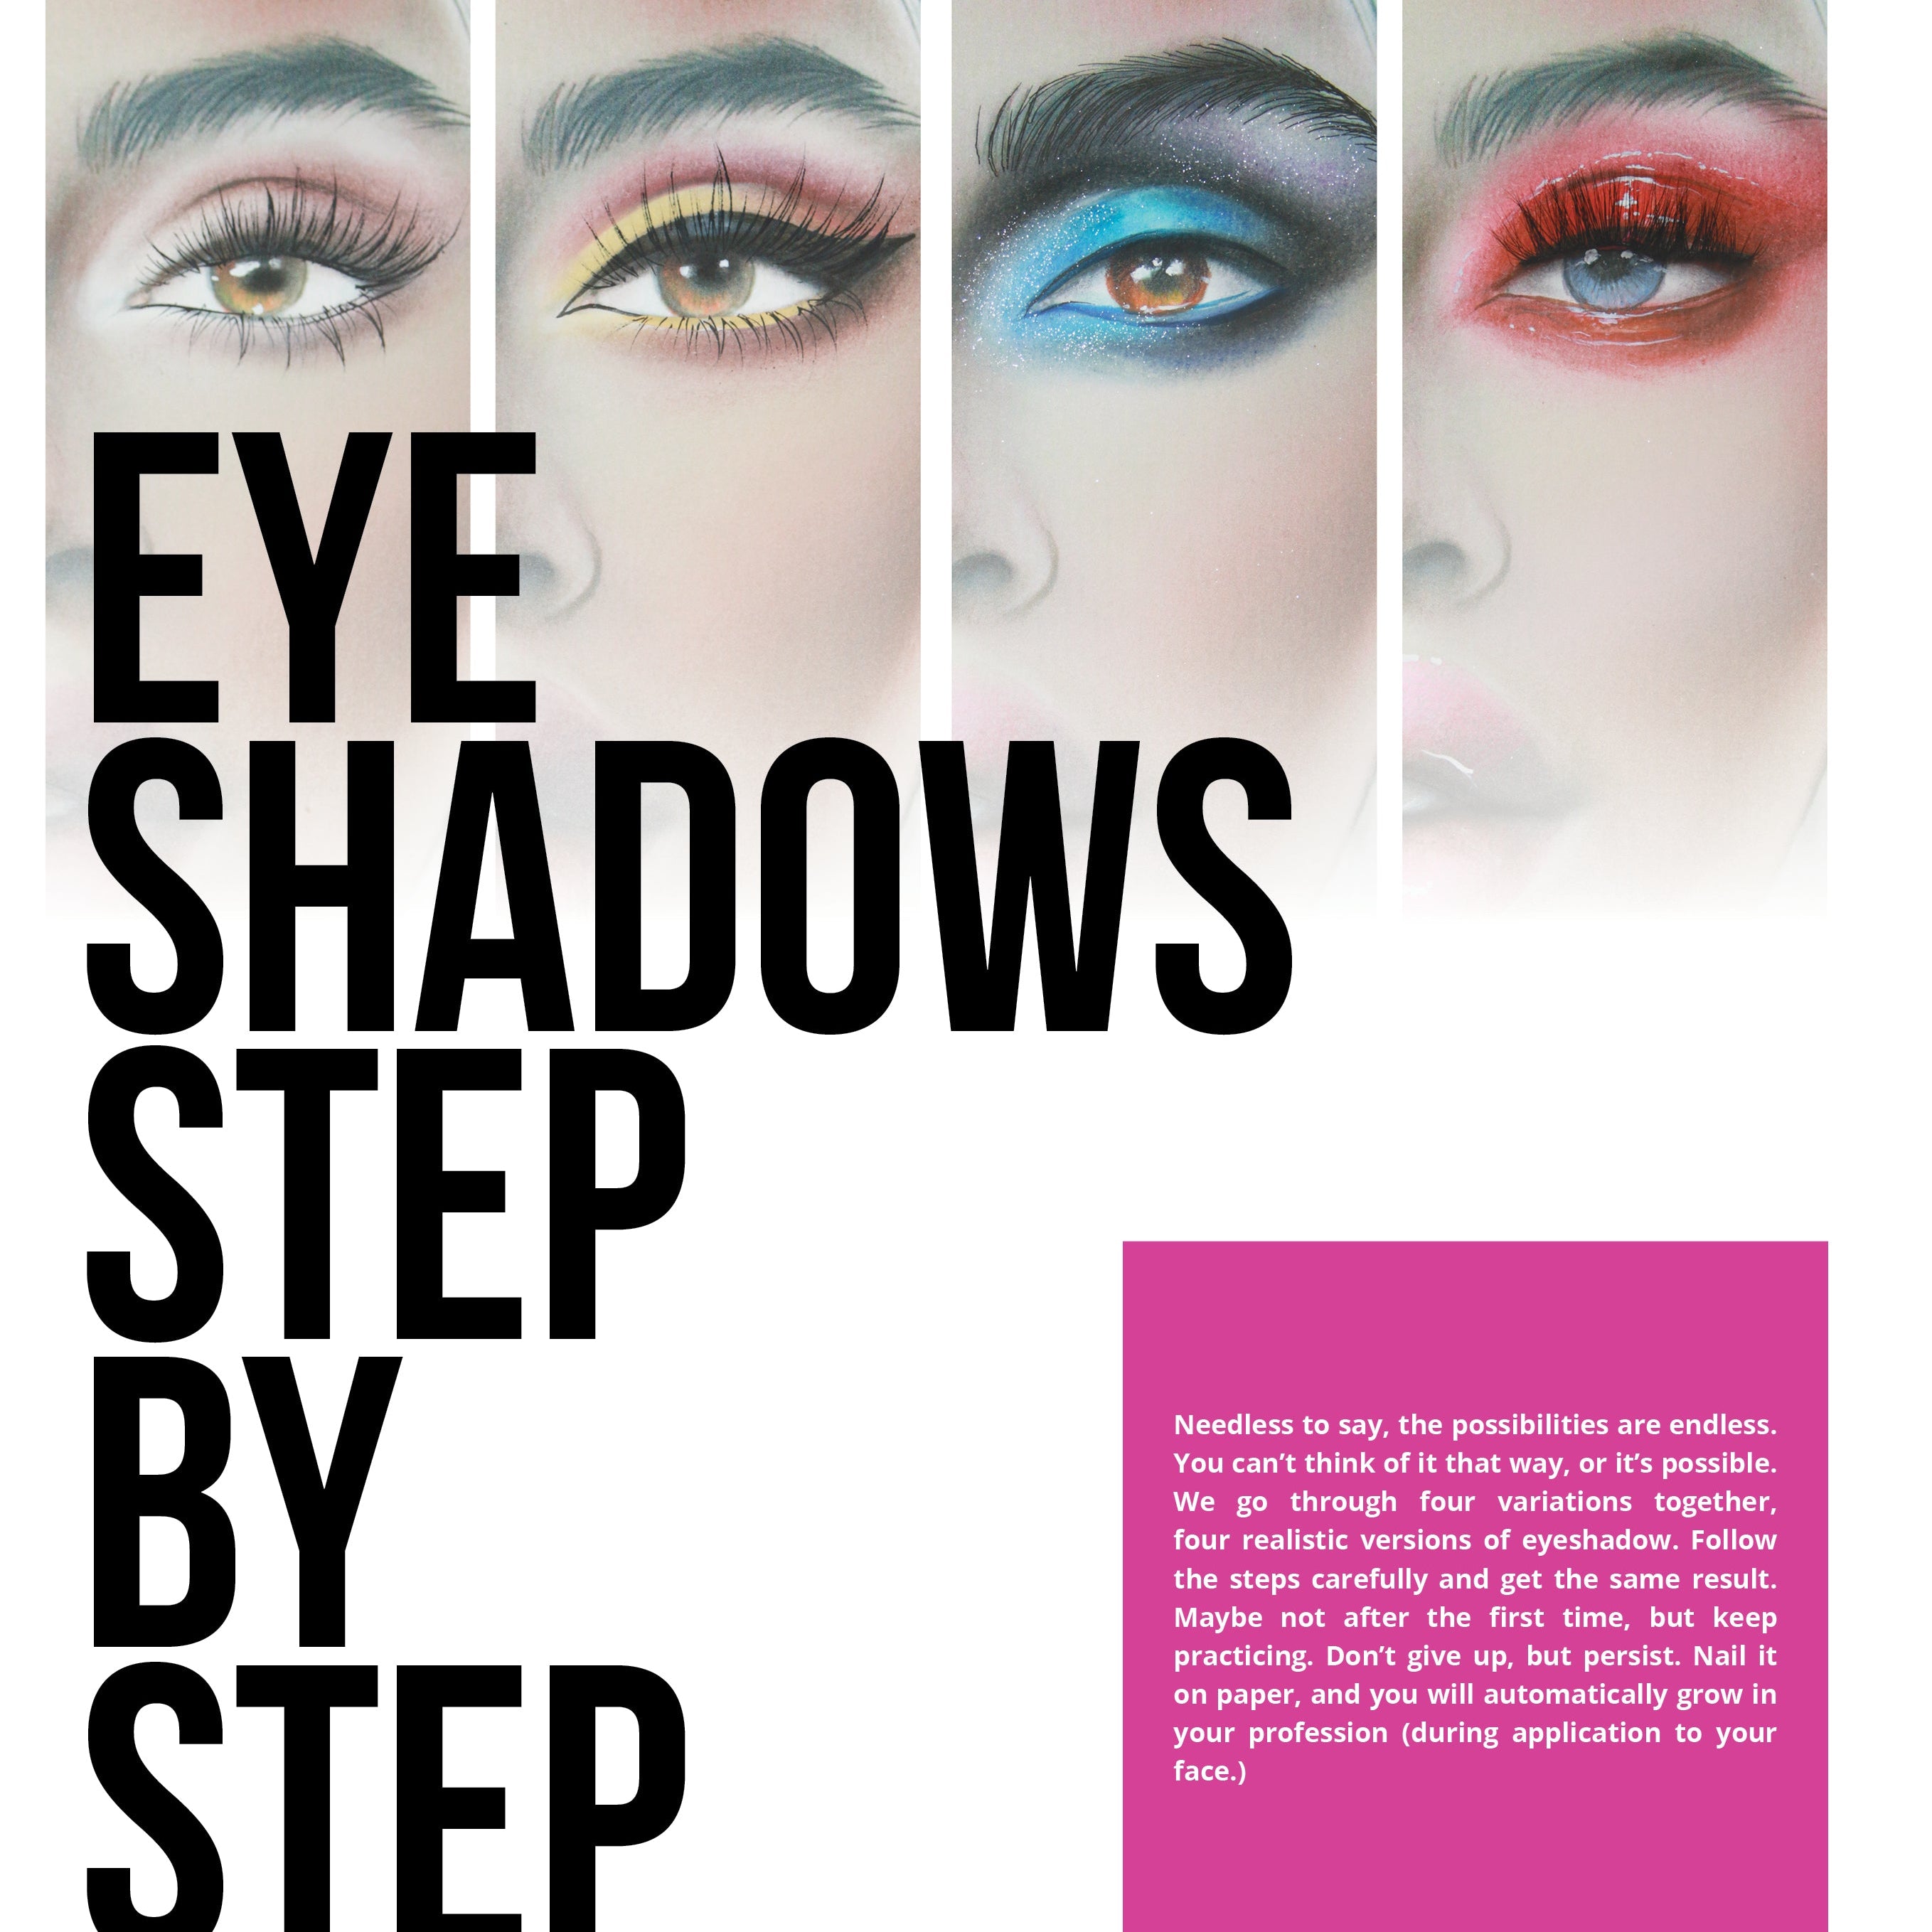 page of the Digital version of the face chart book by liza kondrevich 